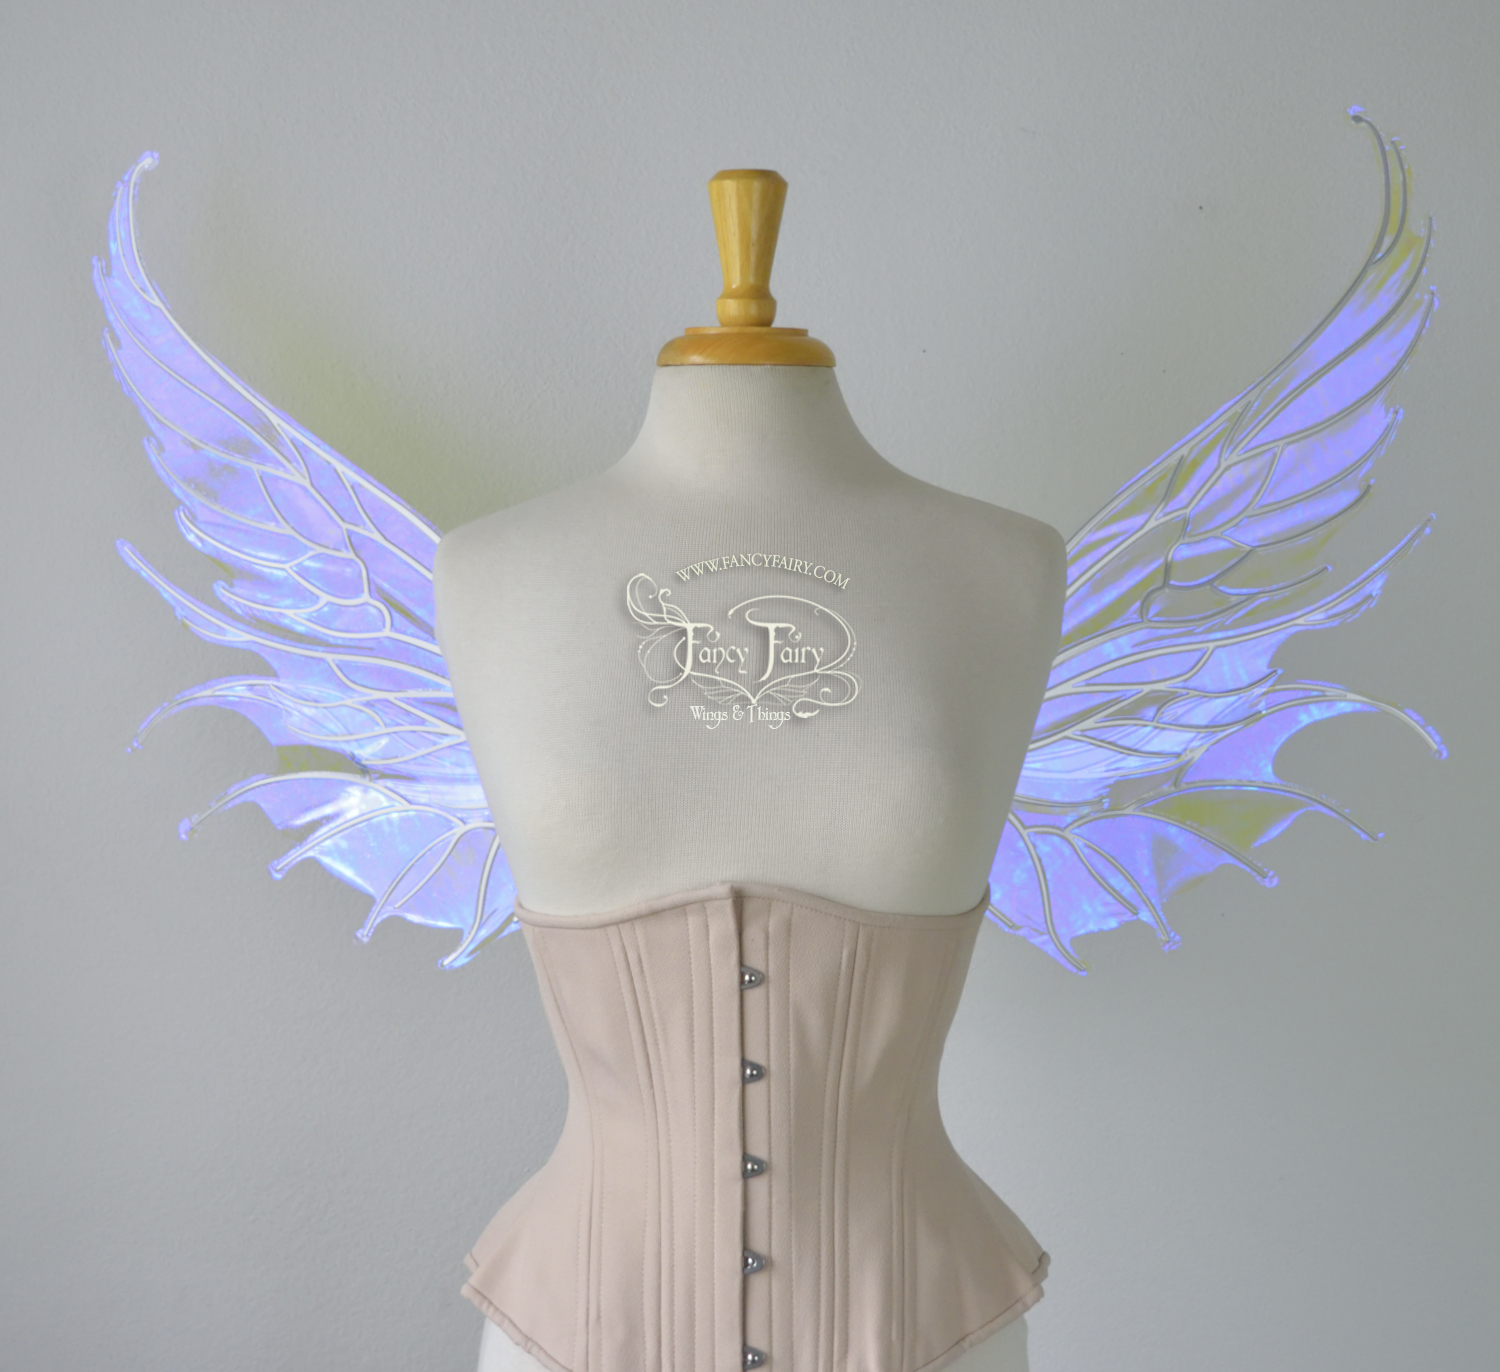 Aquatica convertible Fairy Wings in Ultraviolet with Pearl veins